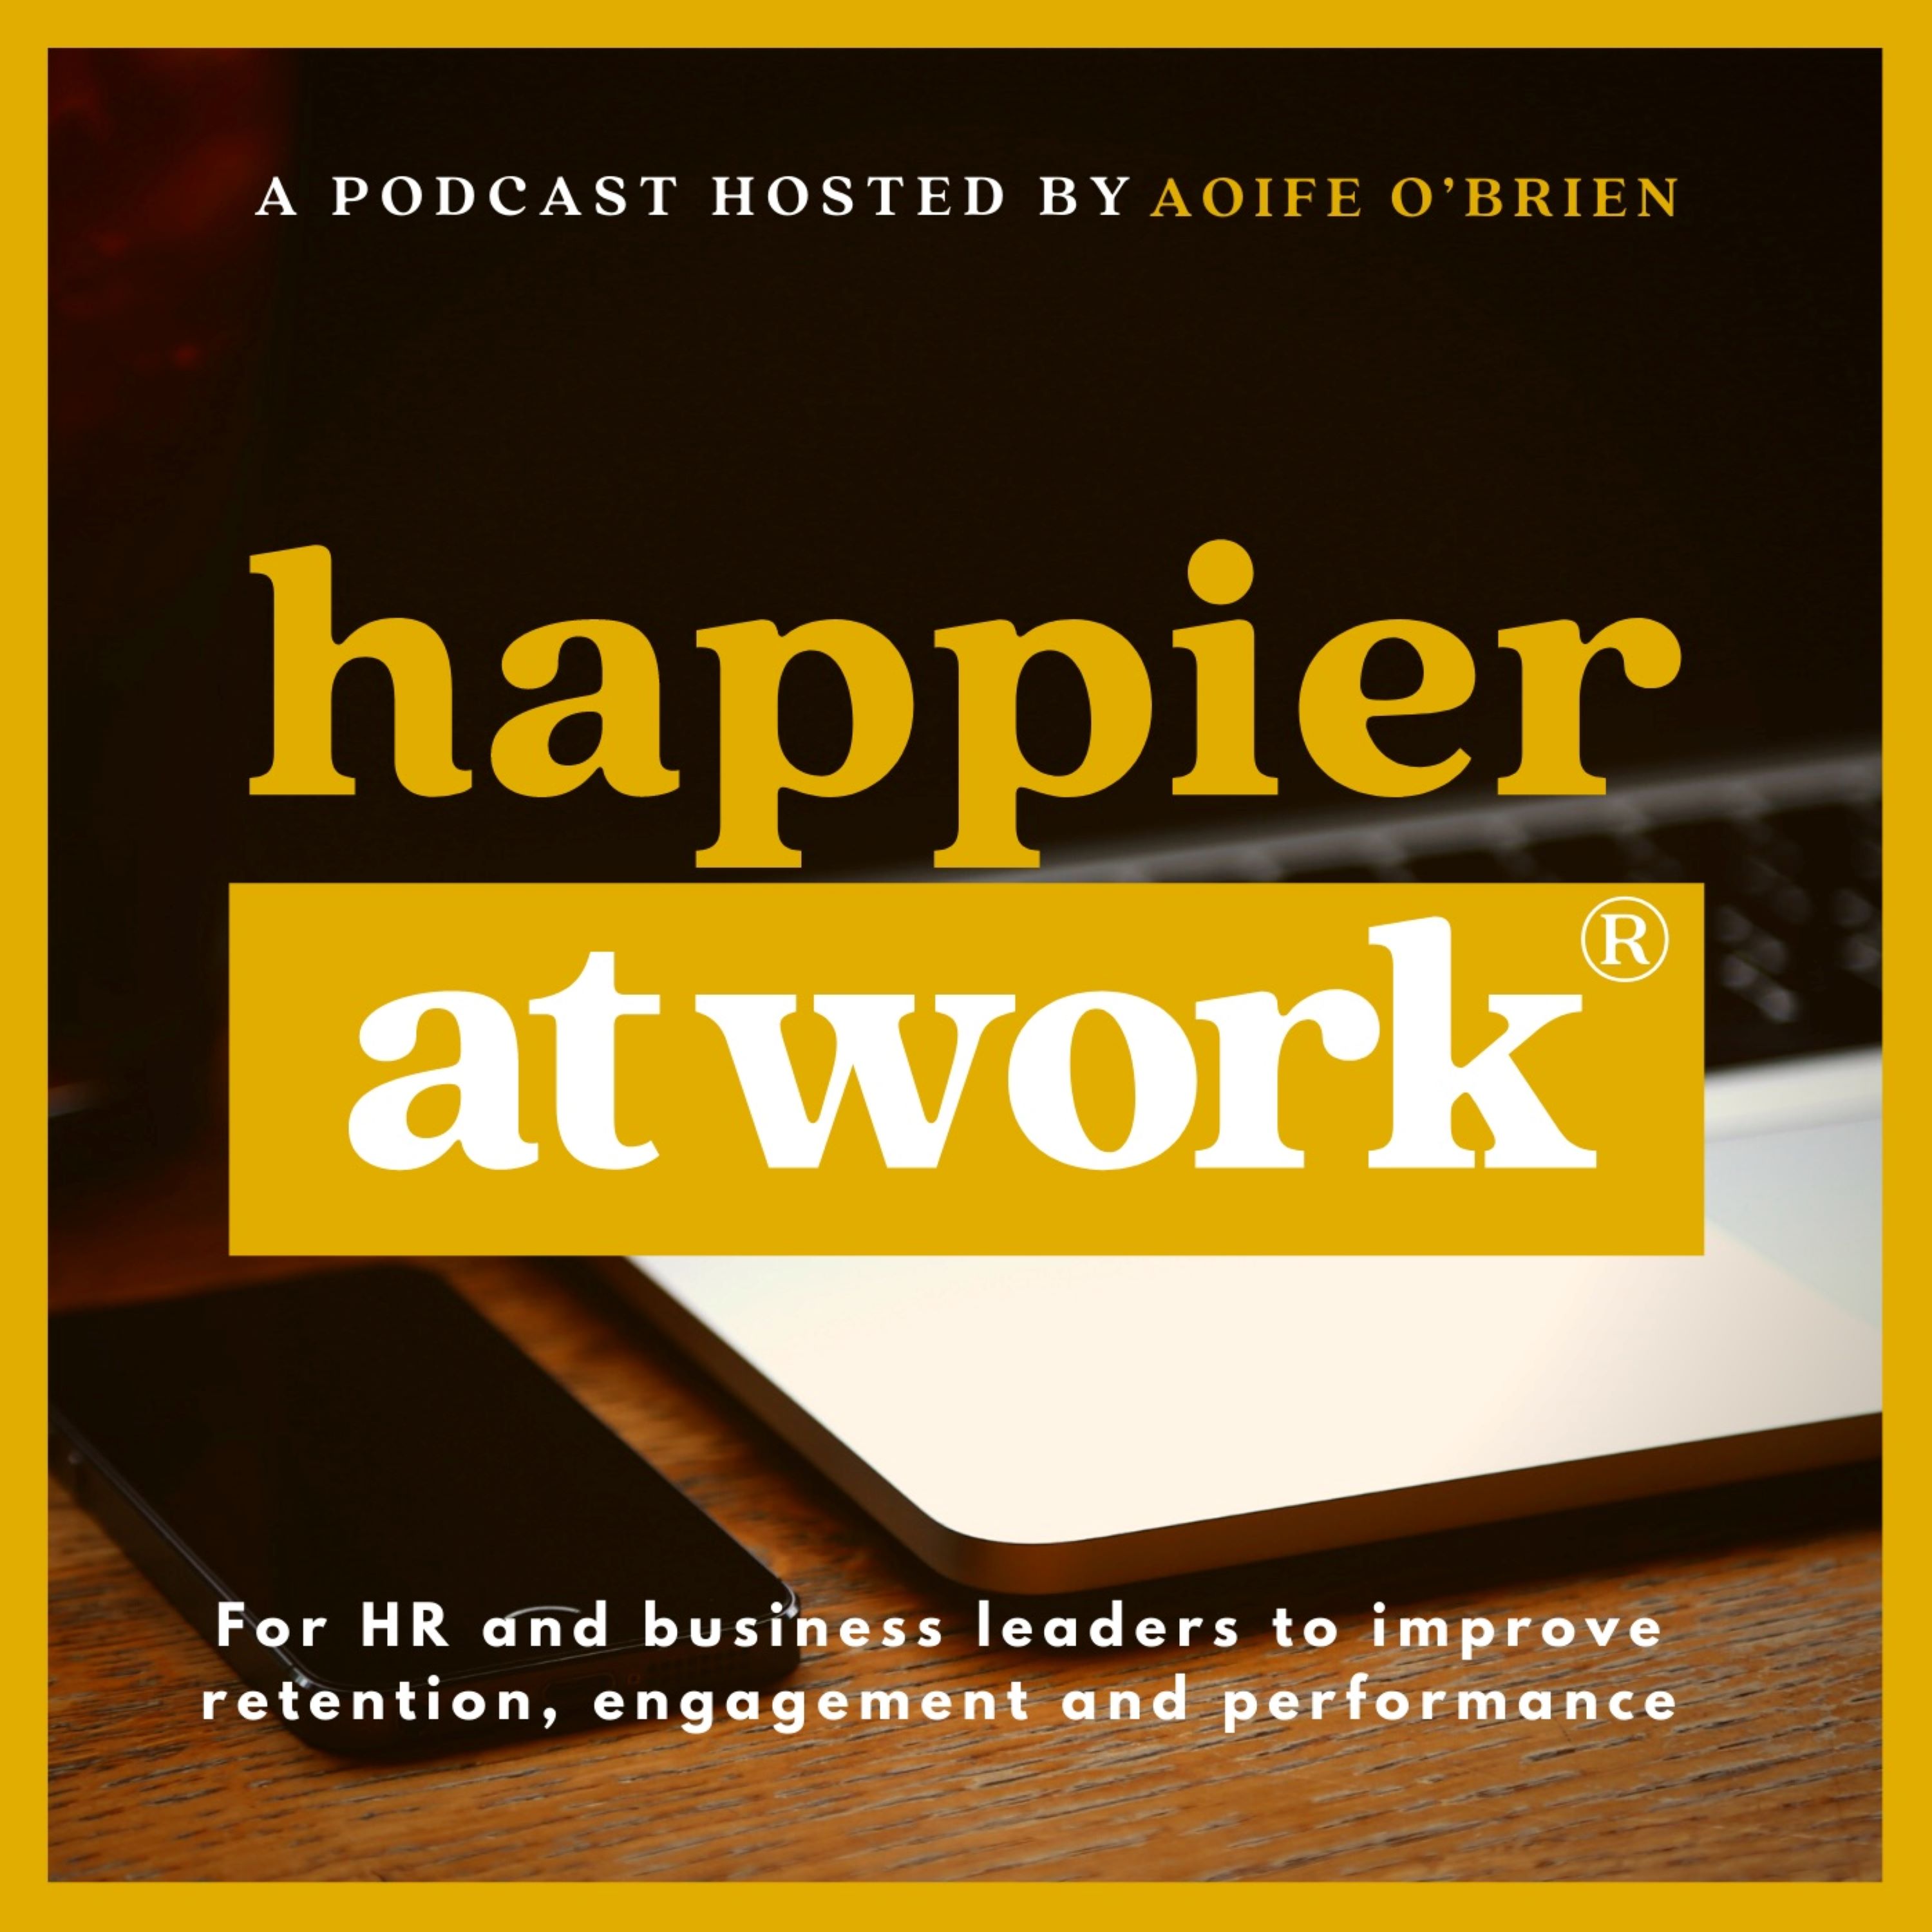 Bonus Episode: More on Building a Happier Workplace with Bhushan Sethi